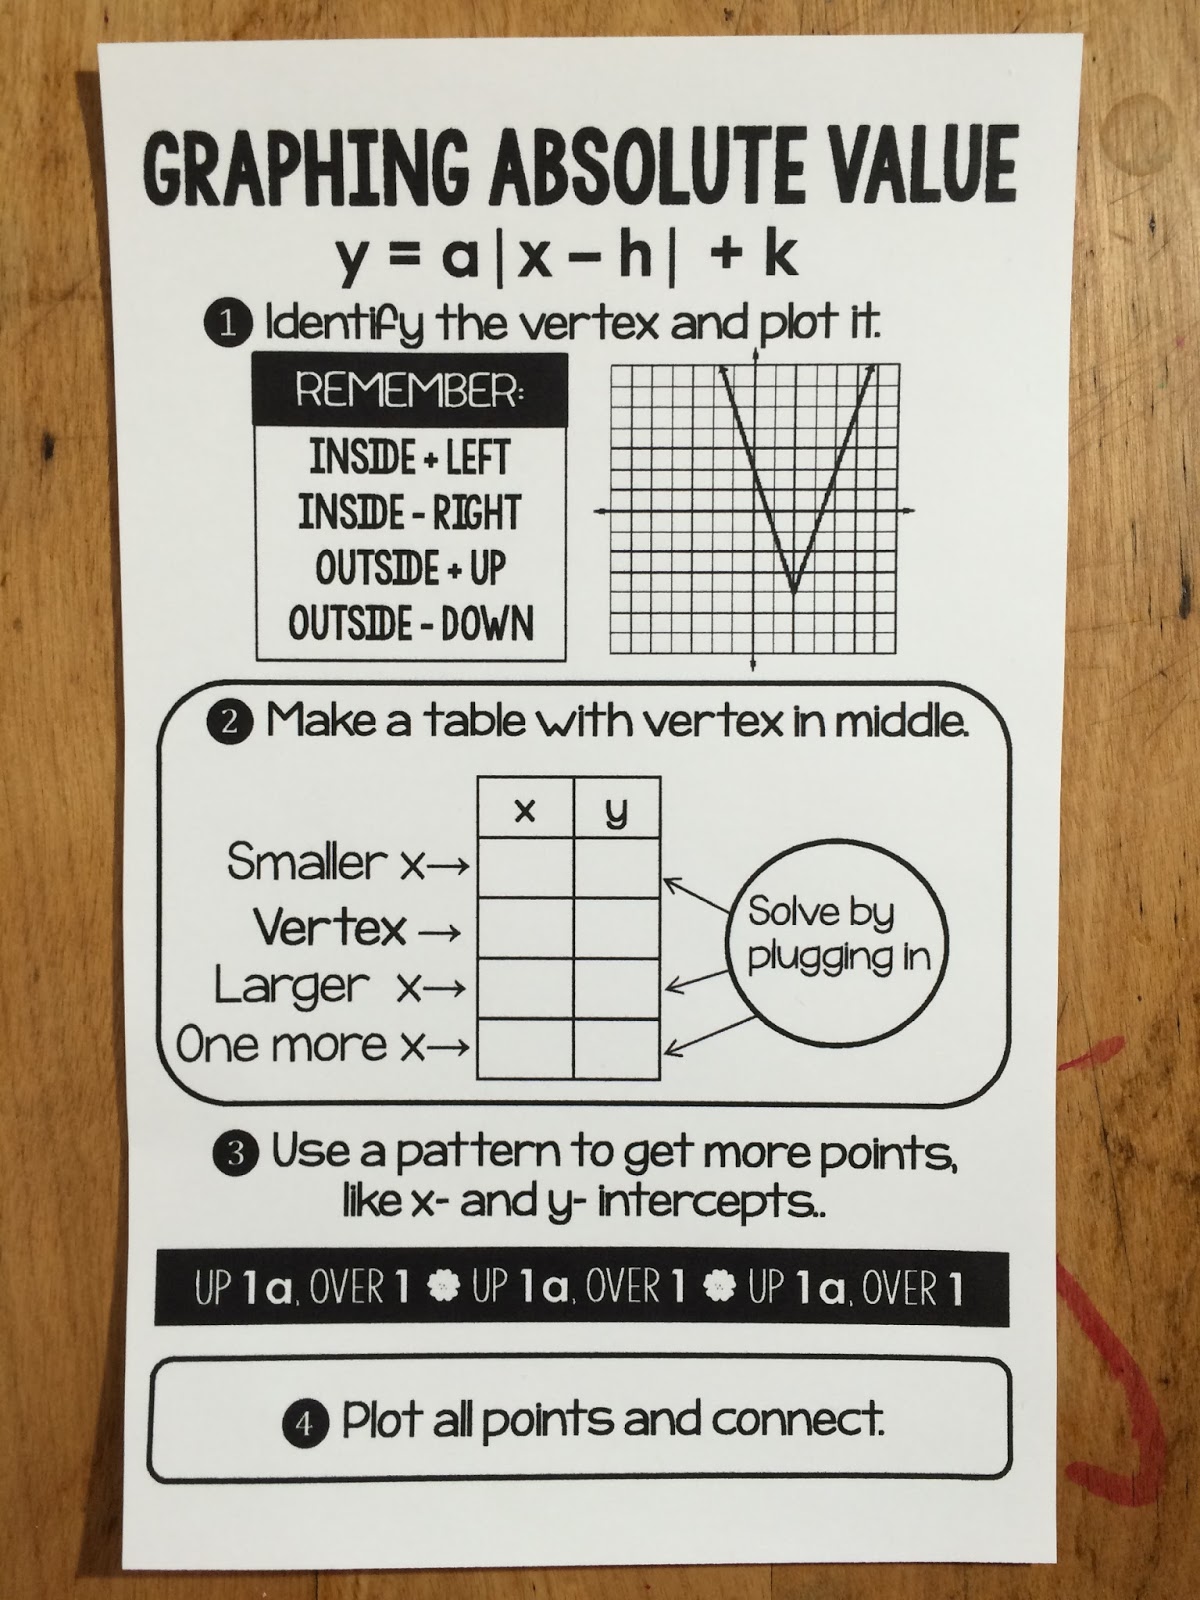 Scaffolded Math and Science: Graphing absolute value functions Intended For Graphing Absolute Value Equations Worksheet